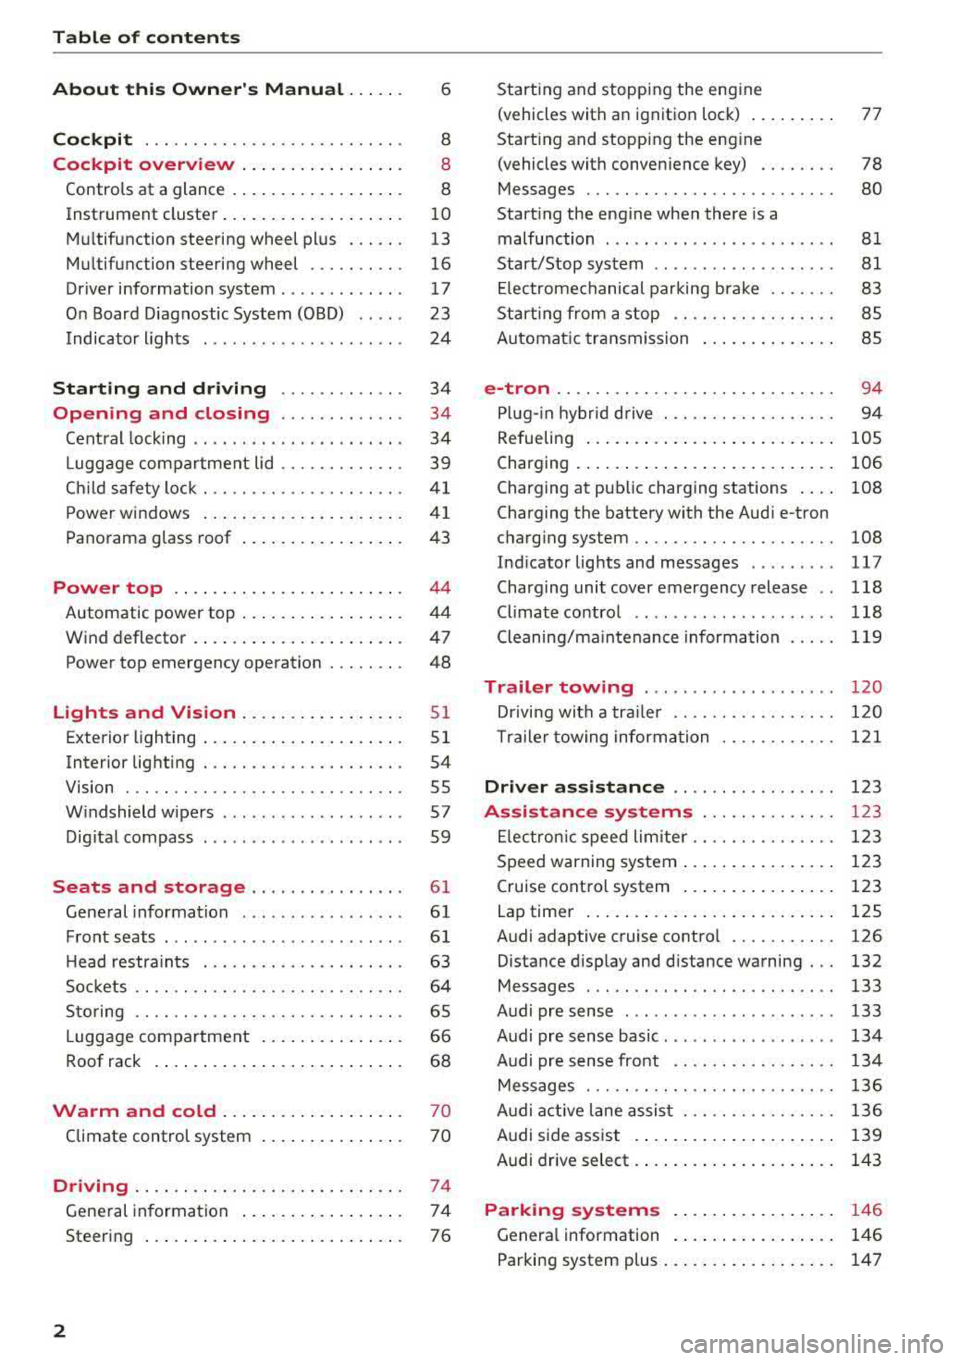 AUDI S3 SEDAN 2017  Owners Manual Table of  content s 
About  this  Owne rs  Manual  . .. .. . 
6 
Cockpi t ... .. ............... .... .. . 8 
Cockpit  overview  . . . . . . .  . . .  . . .  . . . . 8 
Controls  at  a glance  . . . 